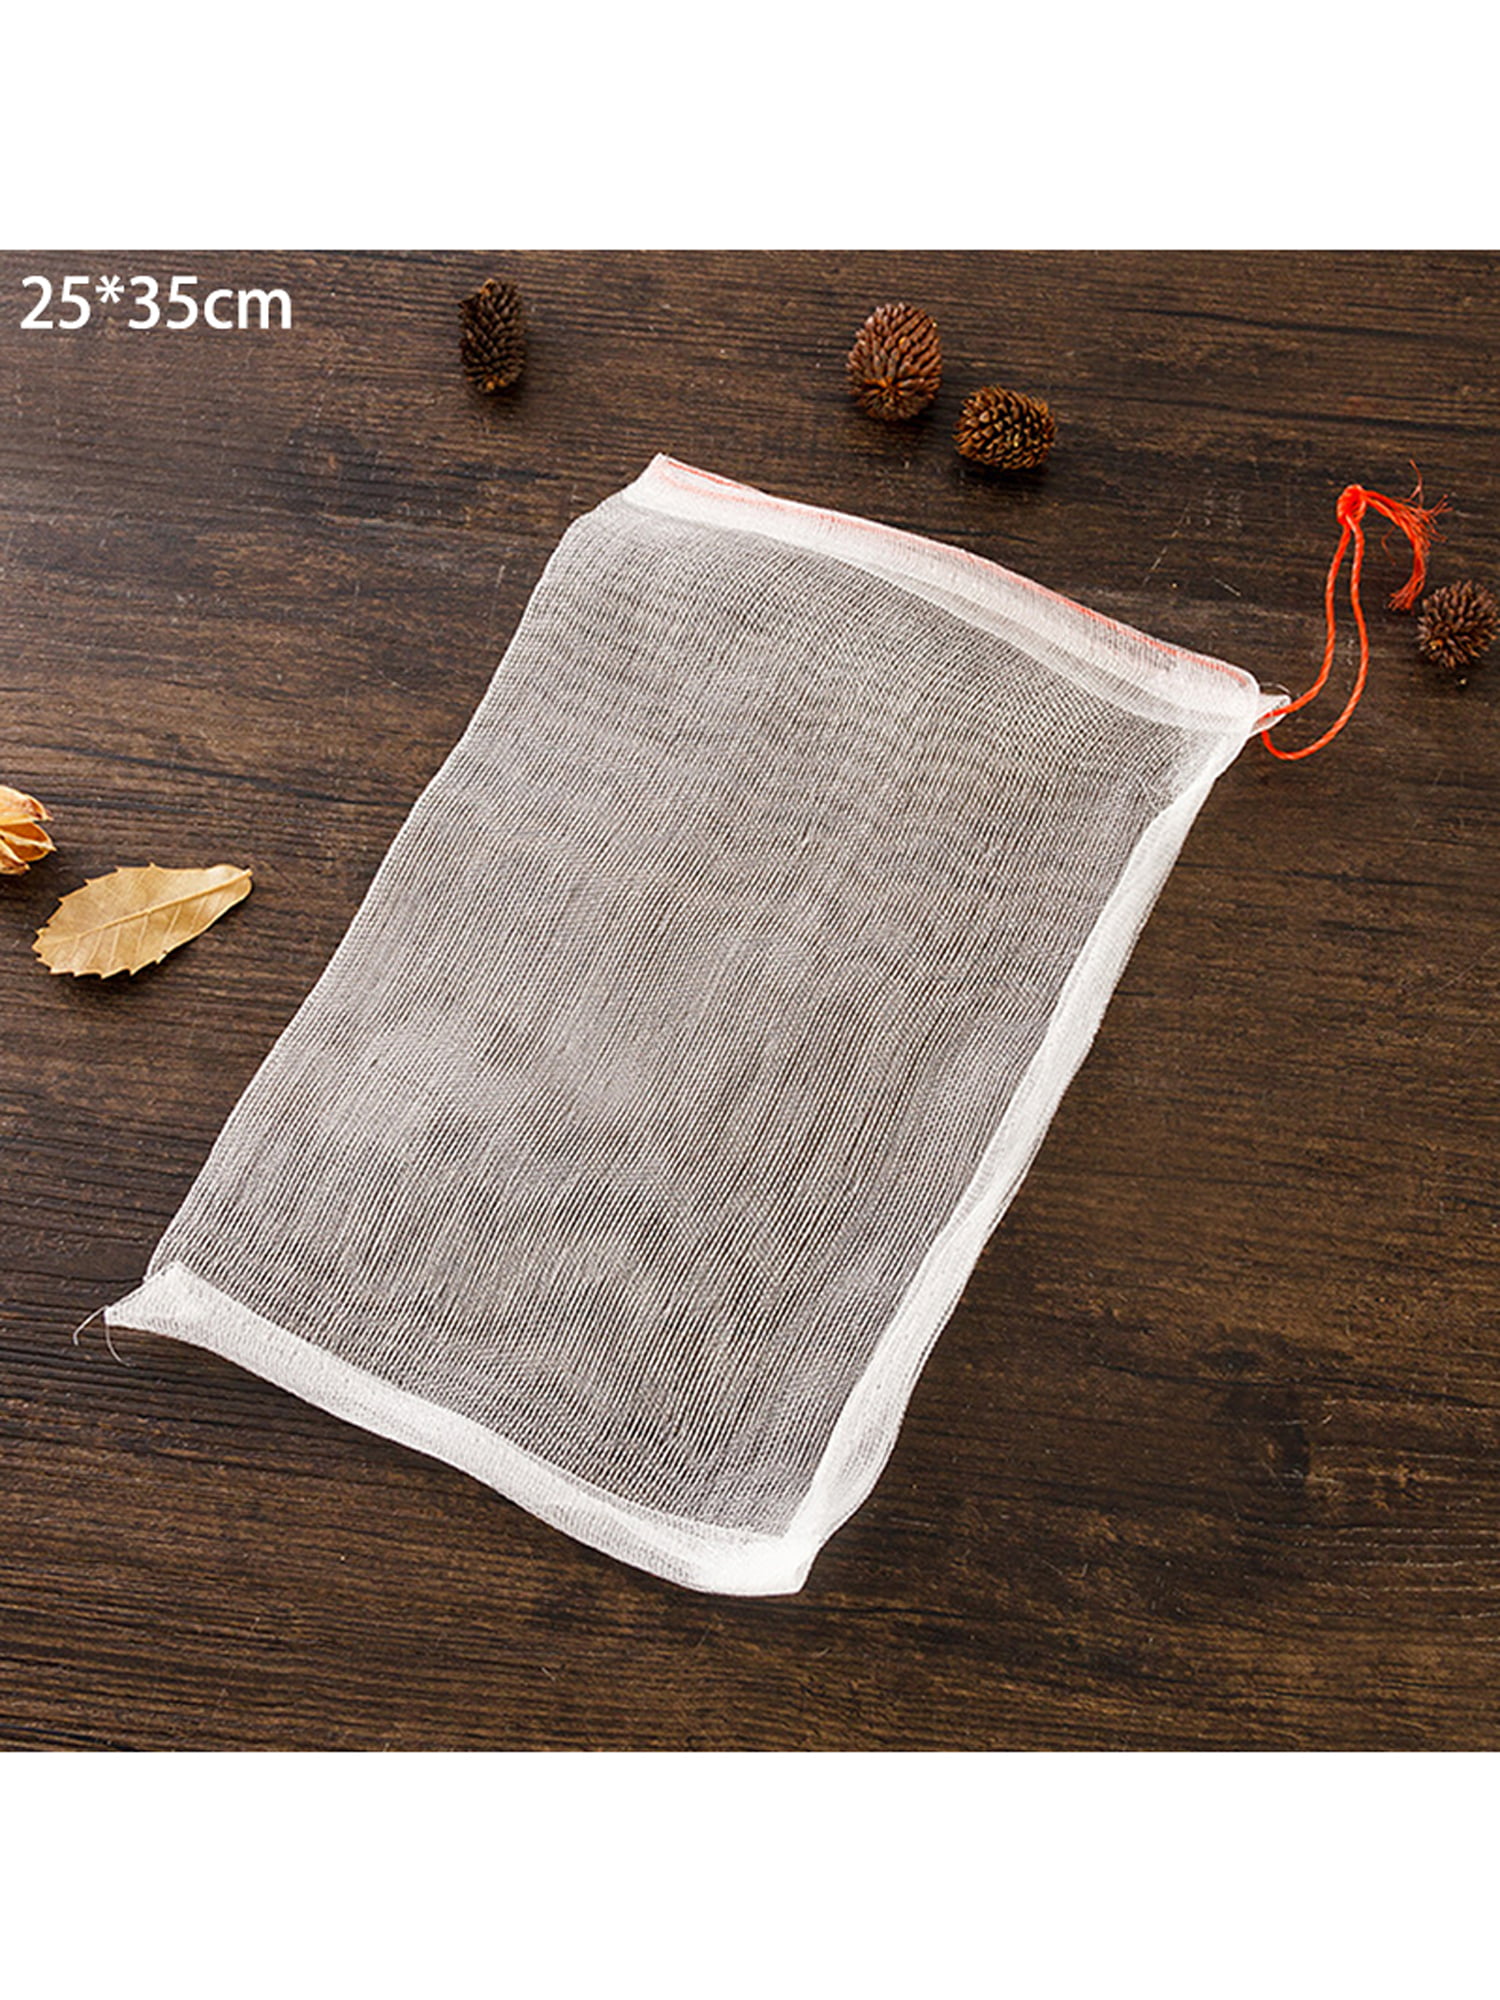 Details about   Garden Plant Fruit Protect Drawstring Net Bag Against Insect Pest Anti-Bird  HOT 